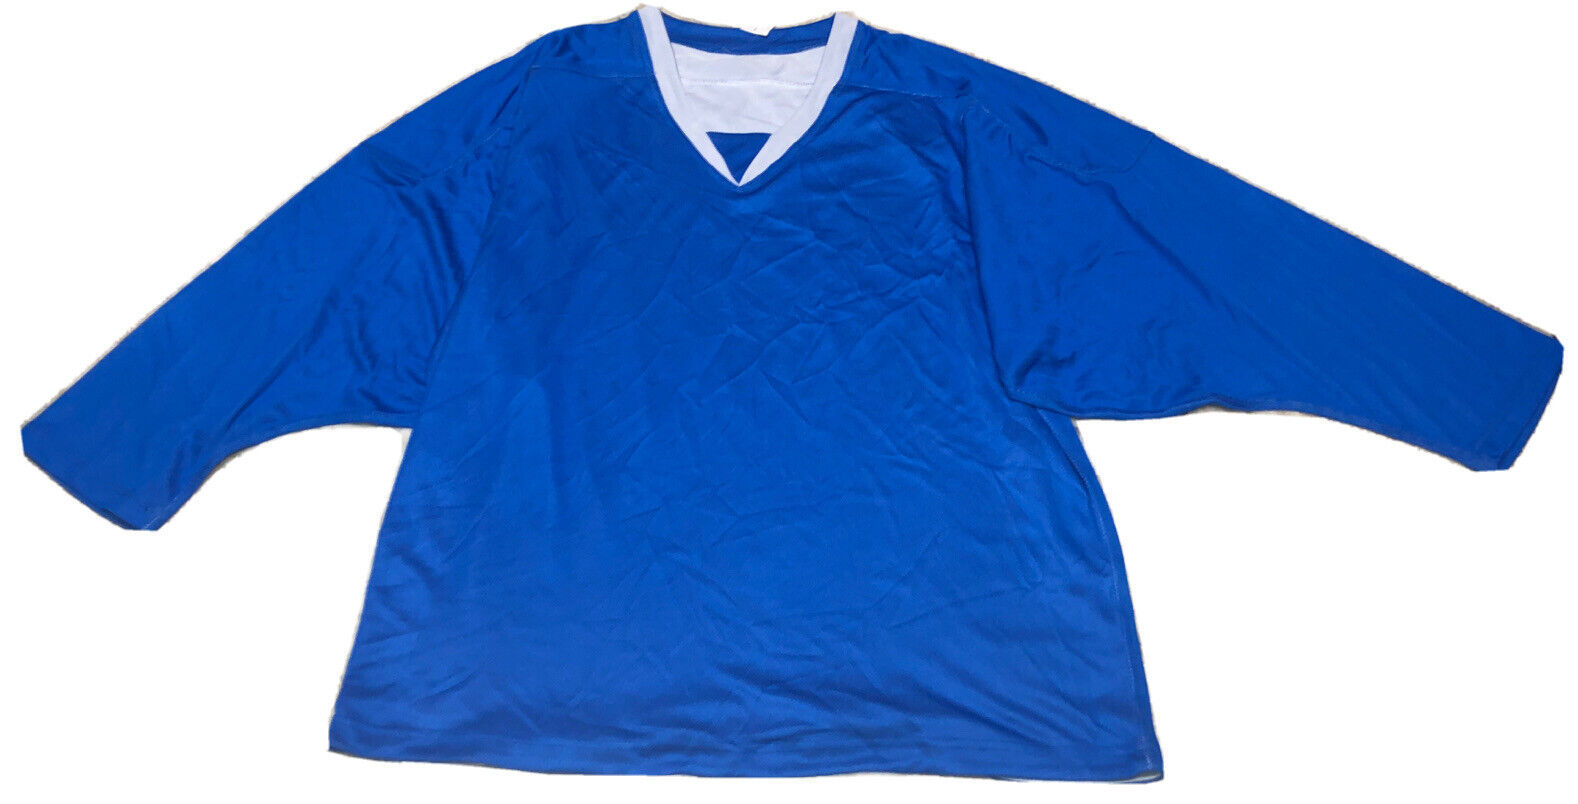 Primary image for Johnny Mac’s Reversible Adult Medium Practice Hockey Jersey Royal/White-SHIP24HR